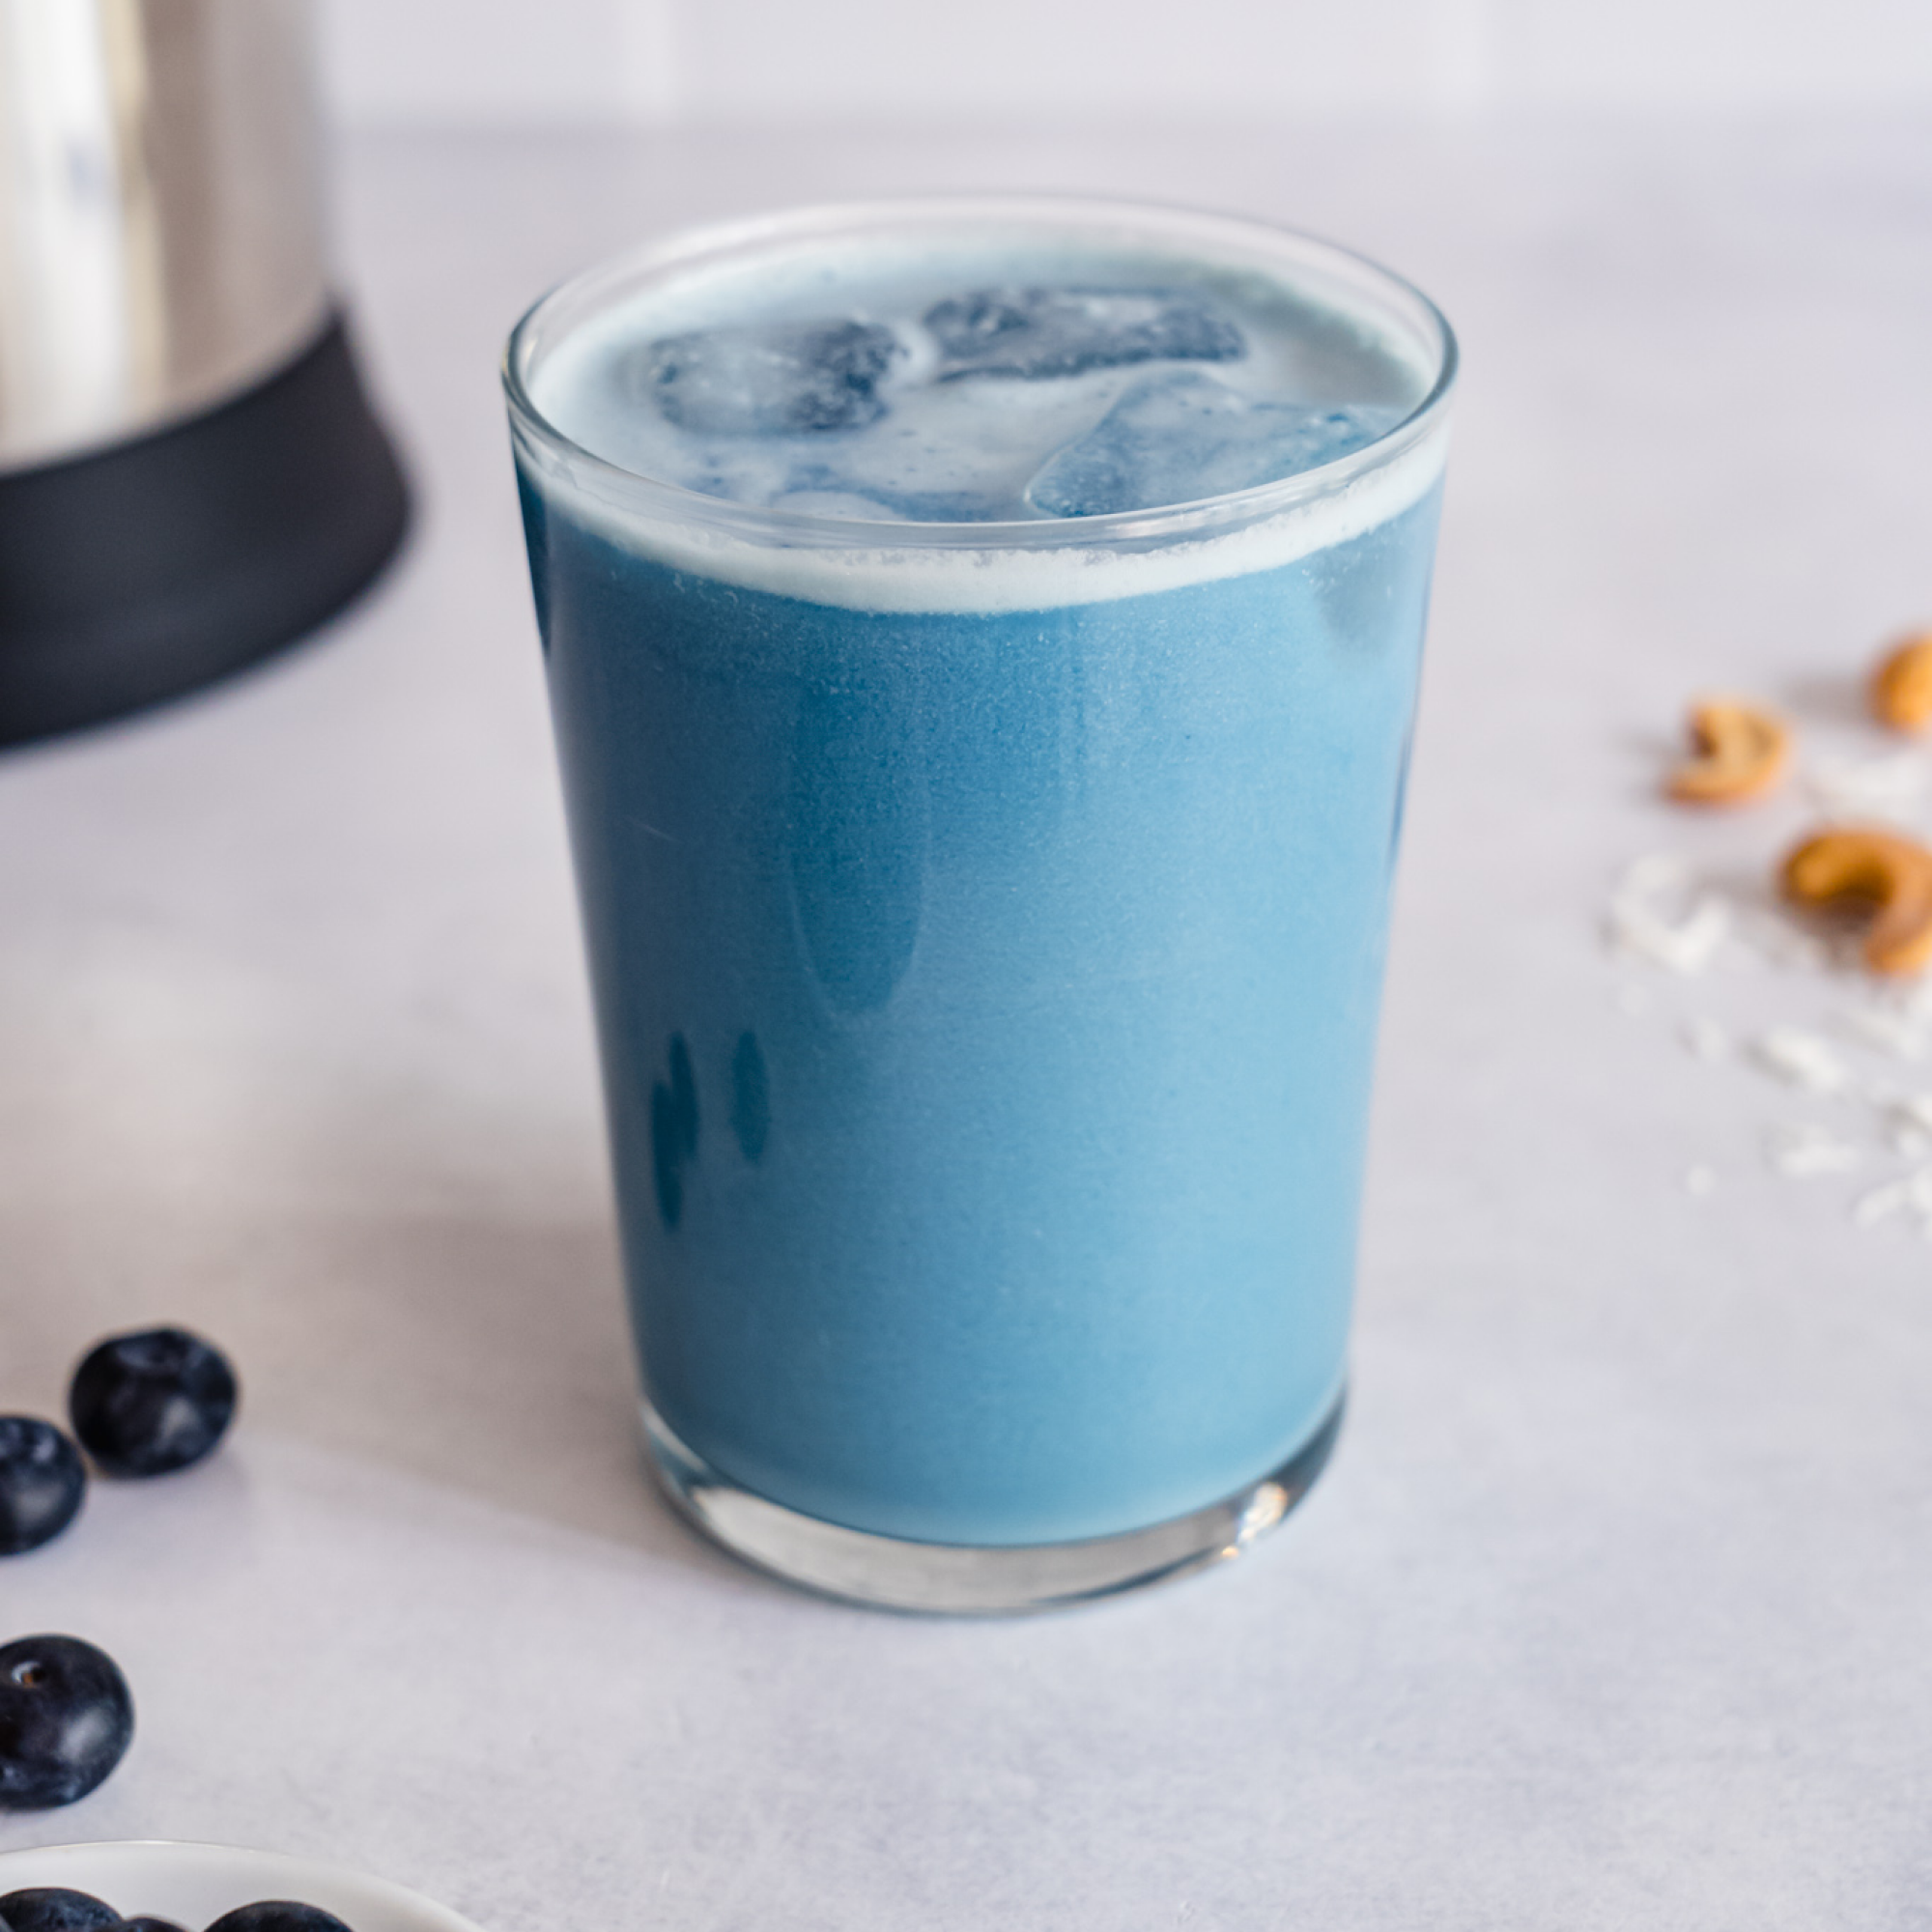 Energizing homemade Blue Refresher created with Almond Cow machine